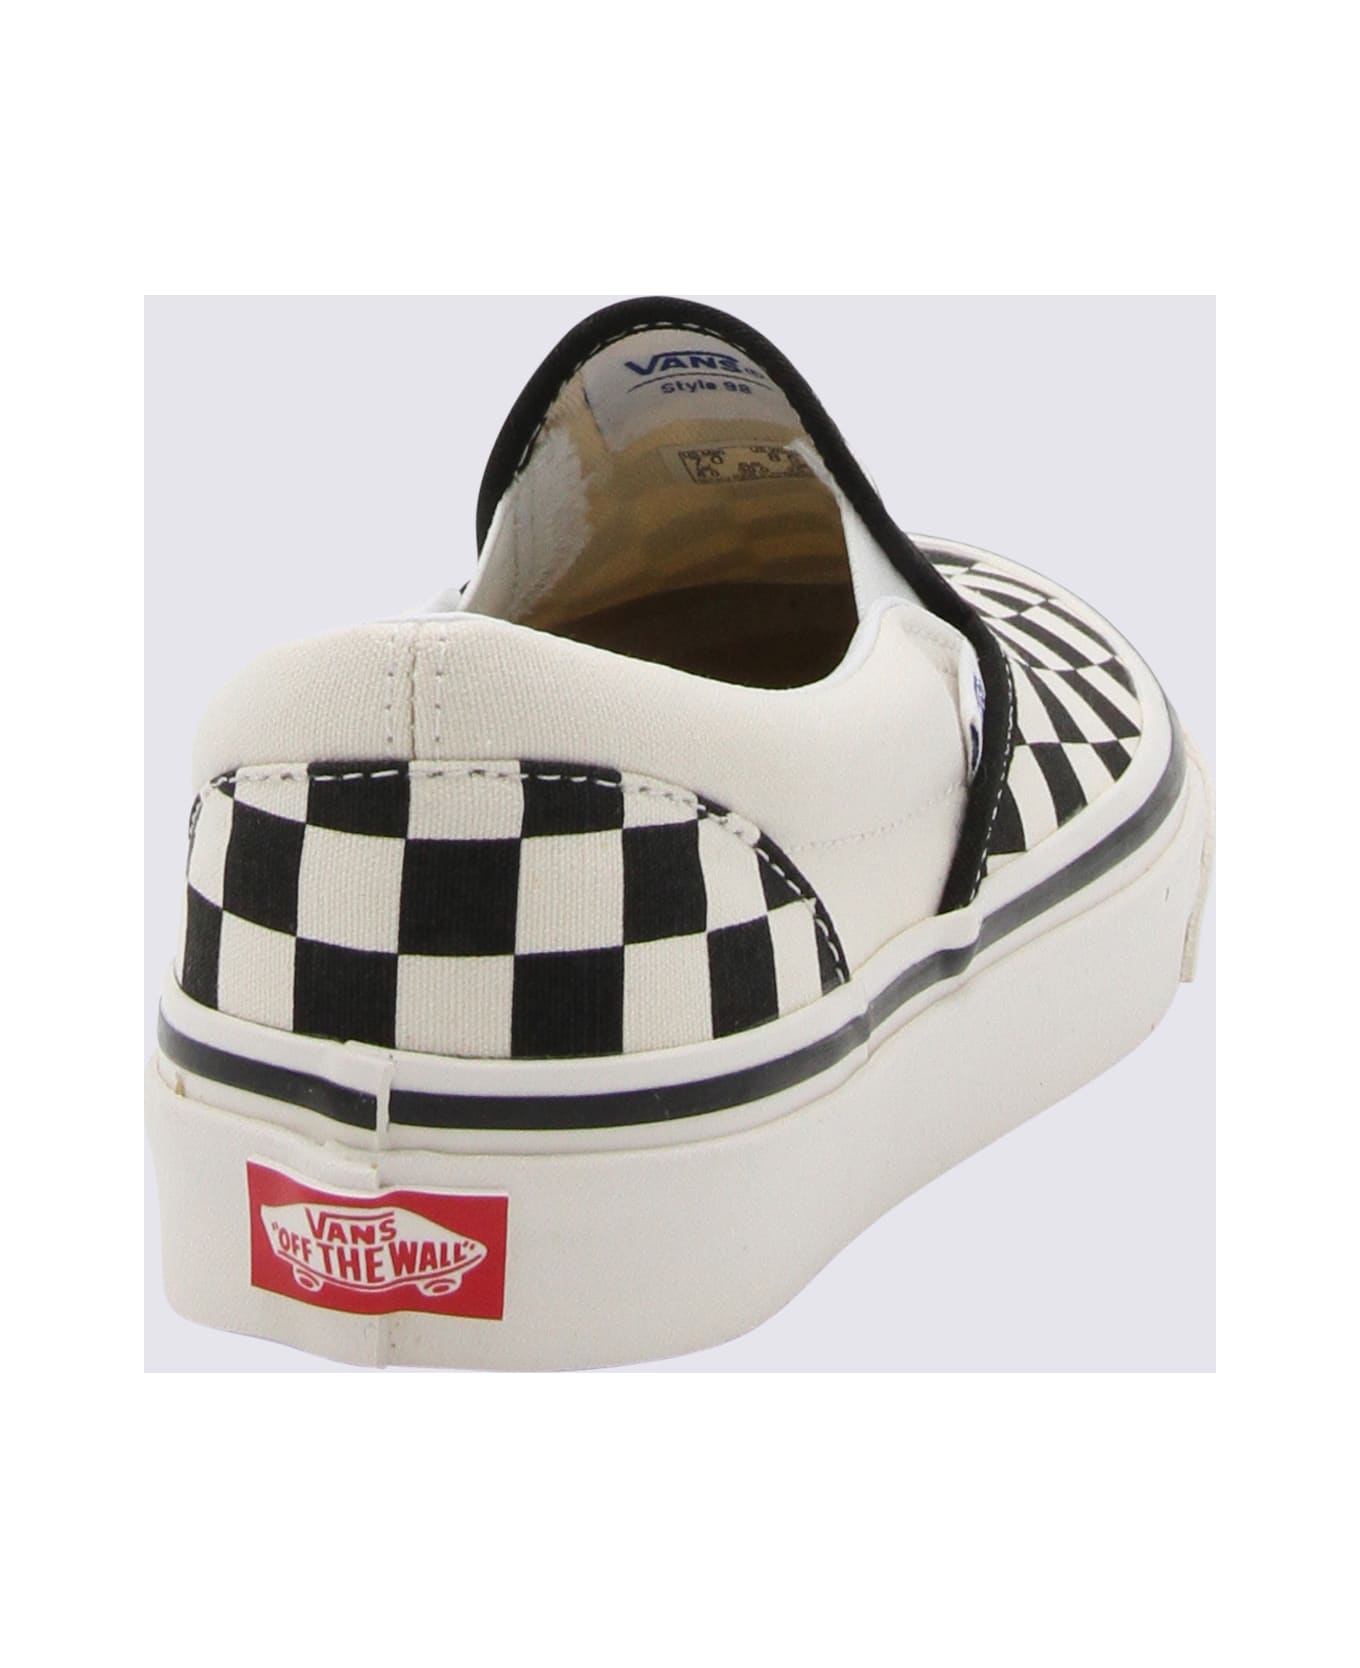 Vans White And Black Canvas Sneakers